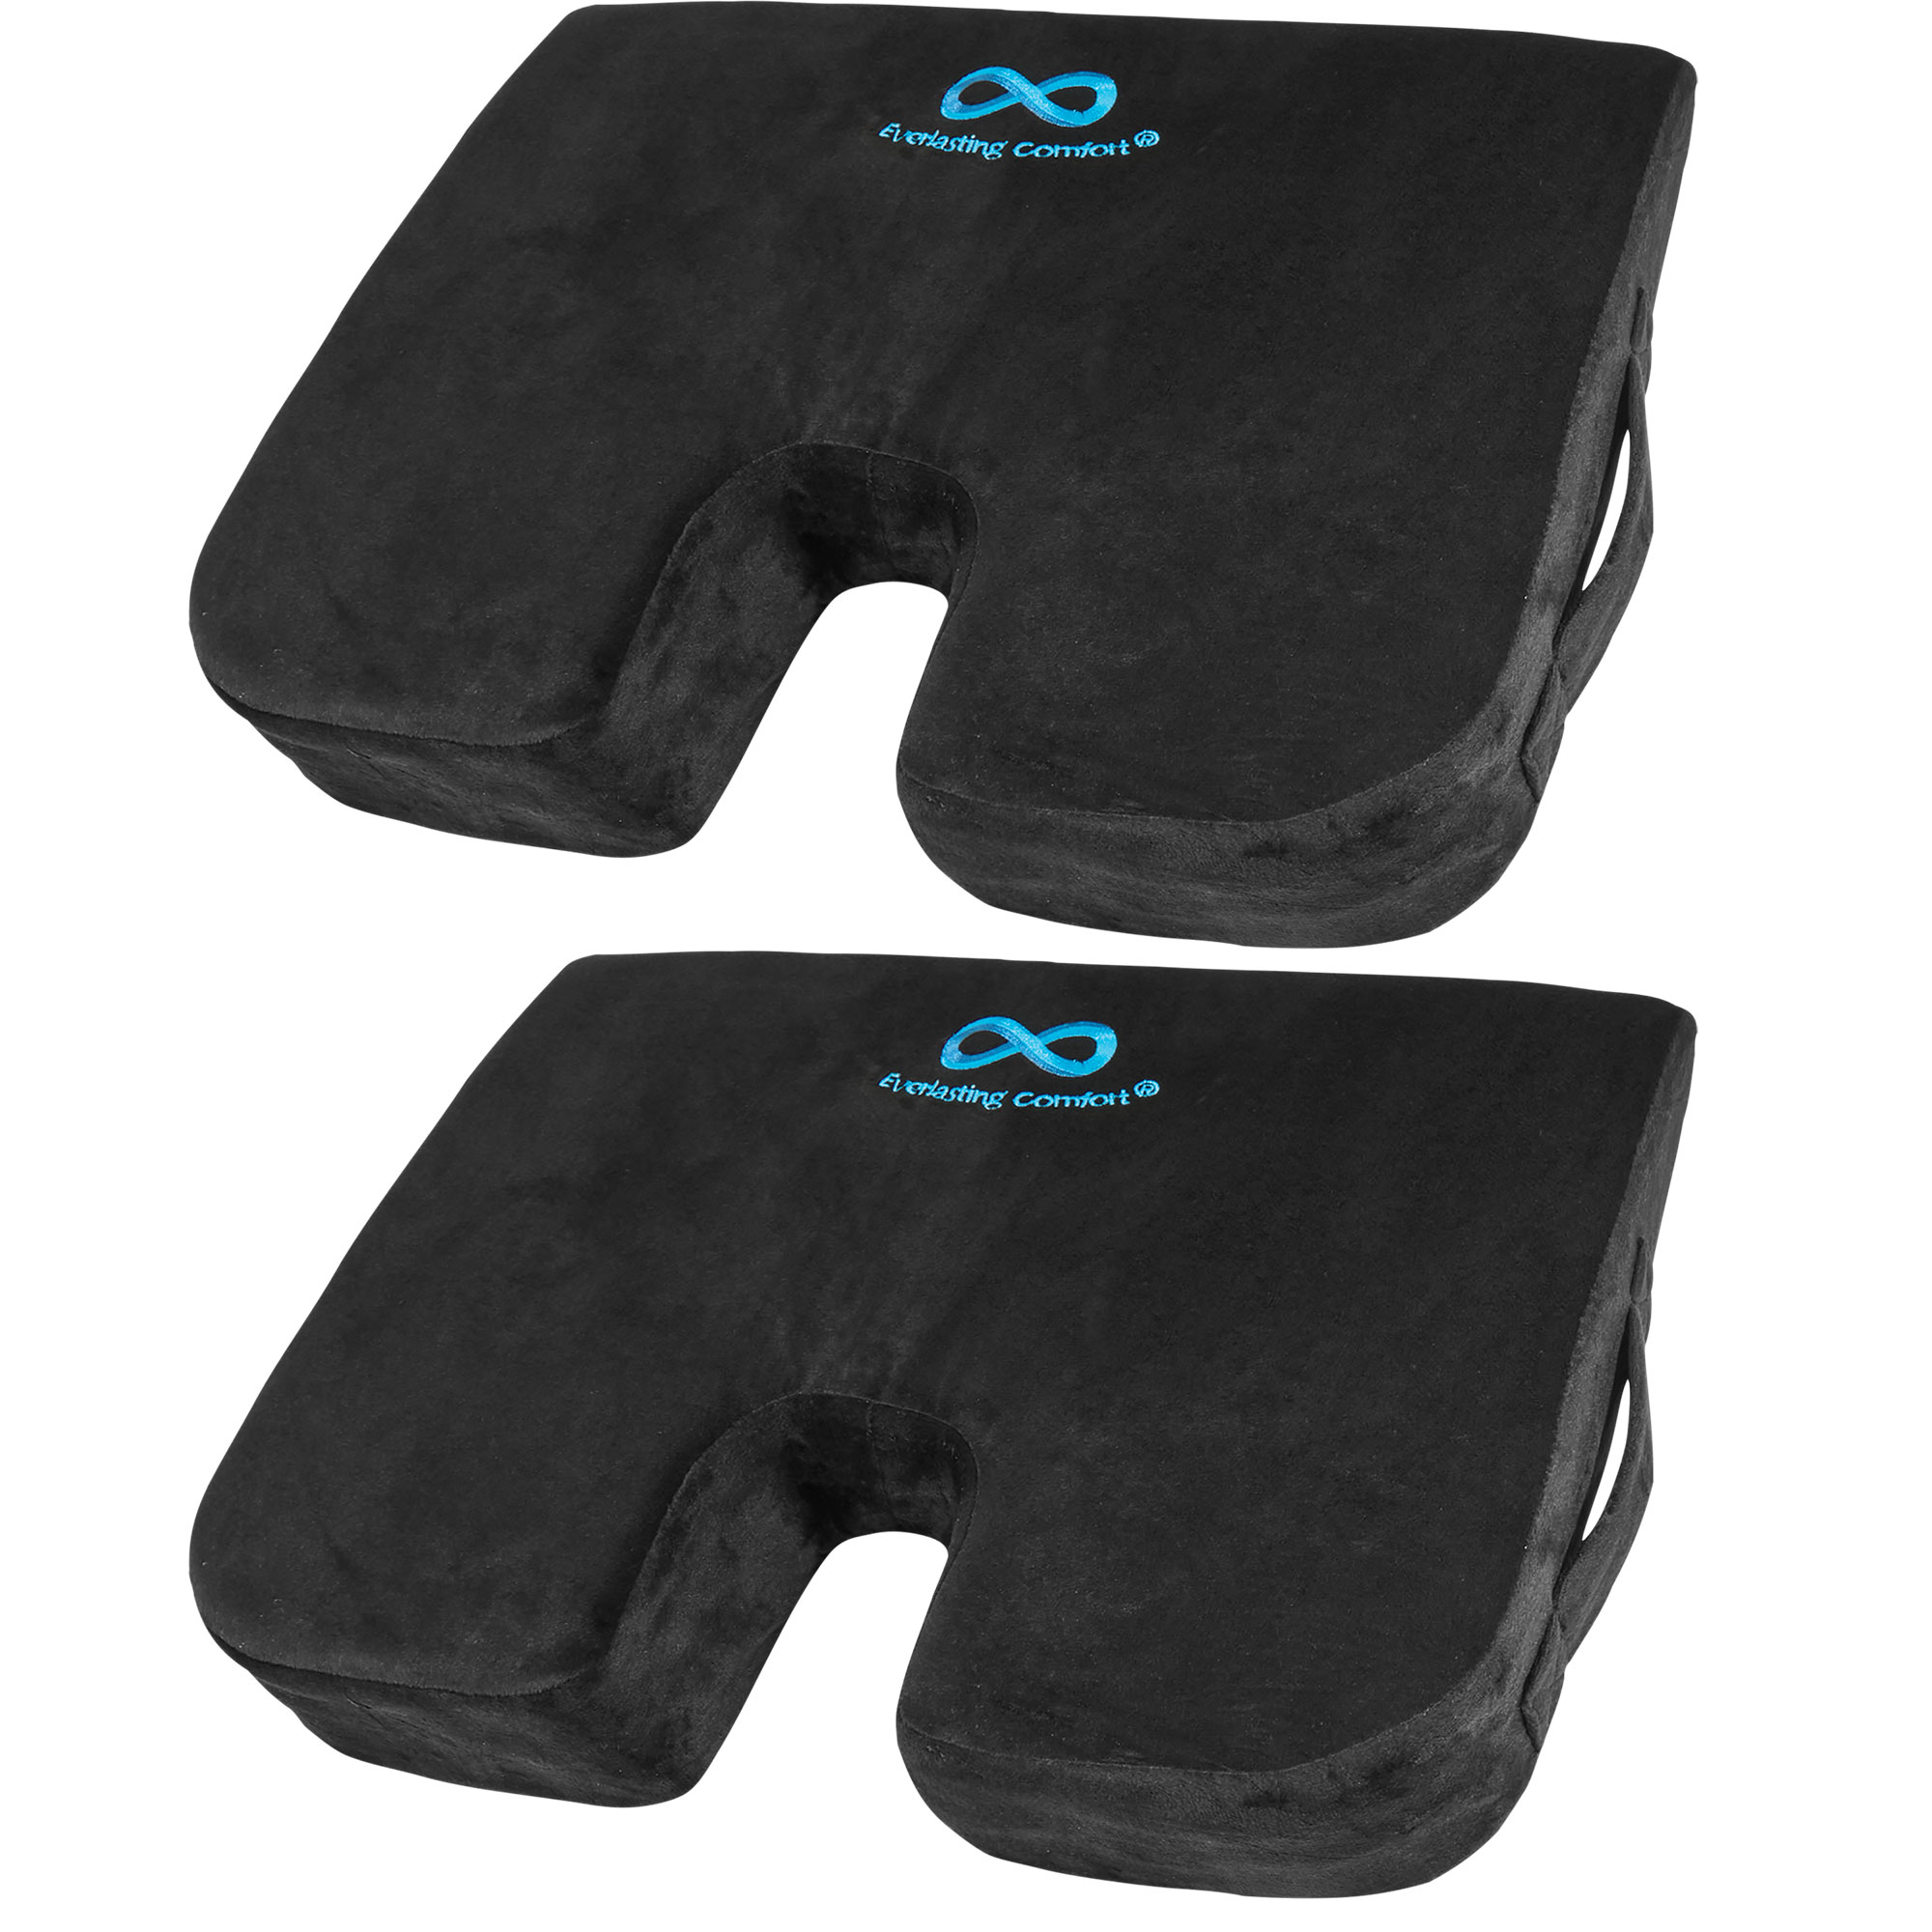 Everlasting Comfort Memory Foam Seat Cushion with Removable Cover